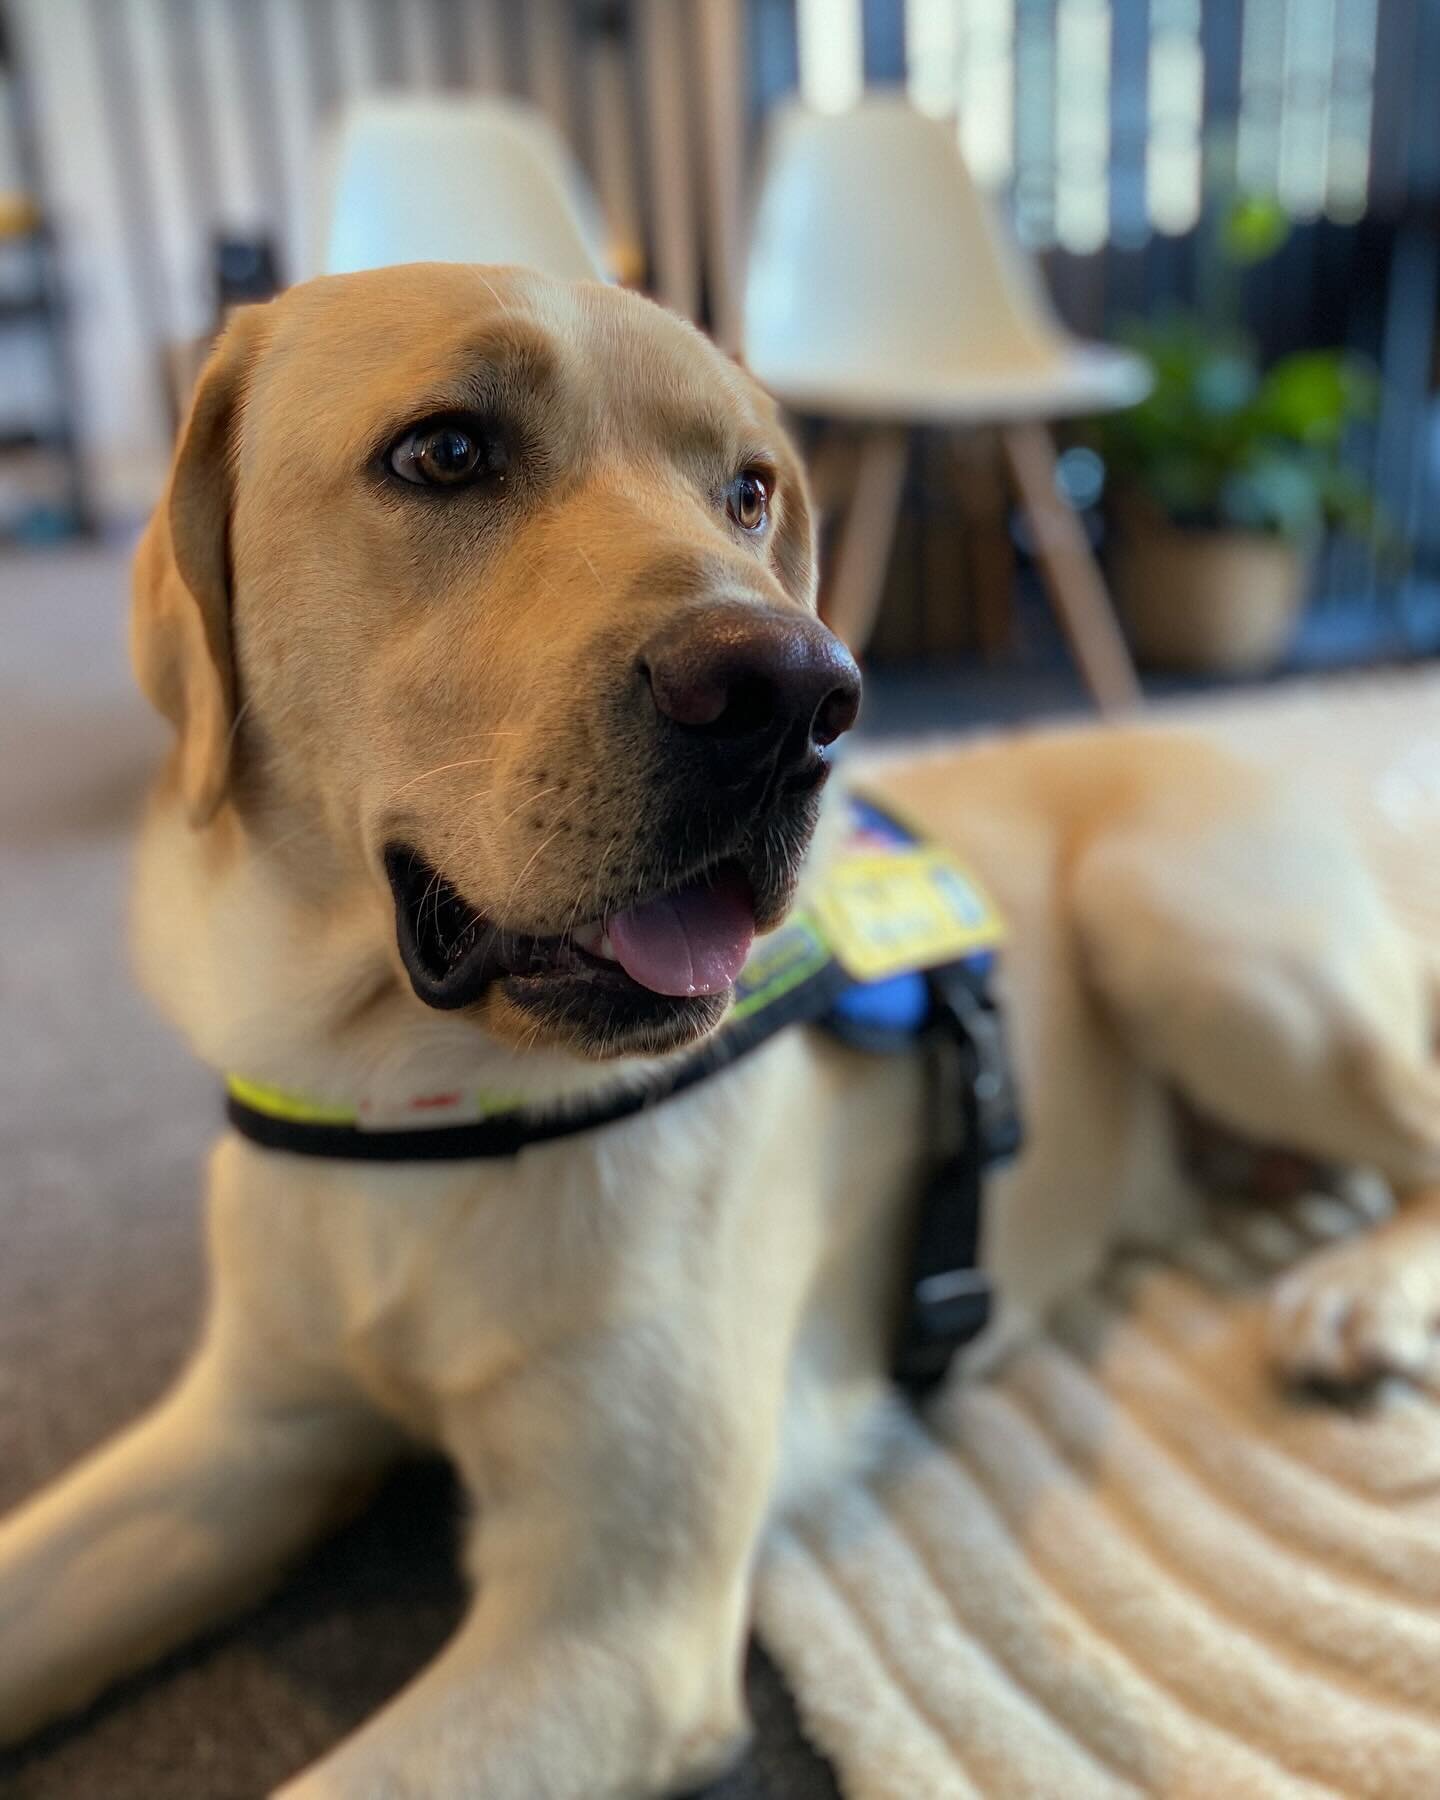 Our Charlie has passed his @seeingeyedogsaustralia test and will be leaving us soon to head off to the training academy. Trading in those L plates for a handle 🥹 so proud of you Charlie baby, you are going to make someone very happy.